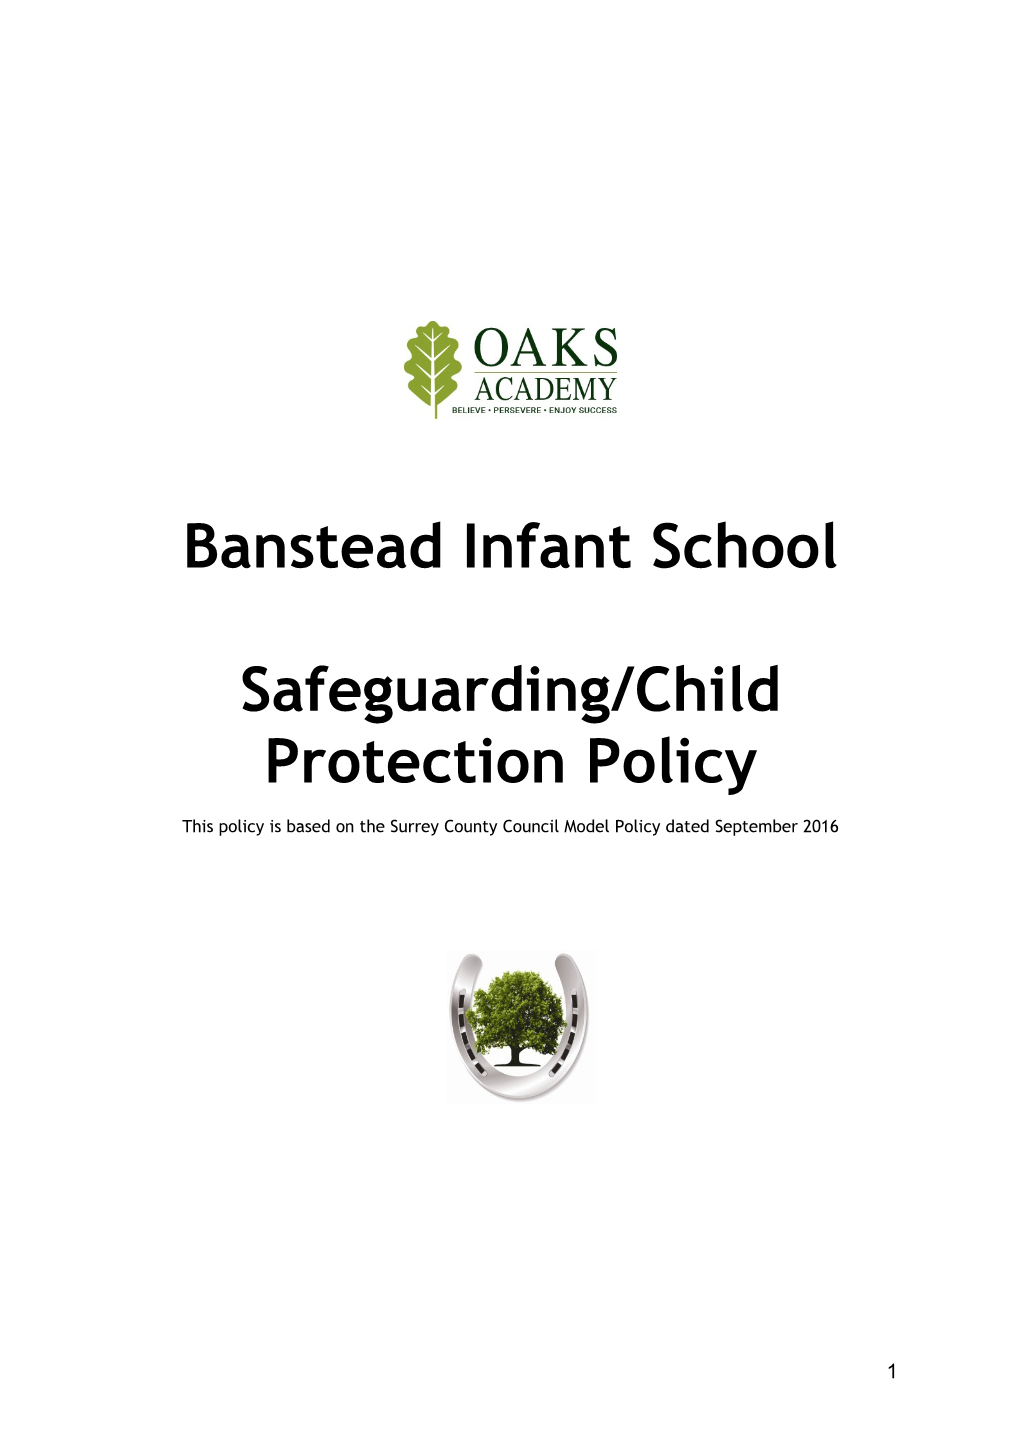 Safeguarding/Child Protection Policy s1